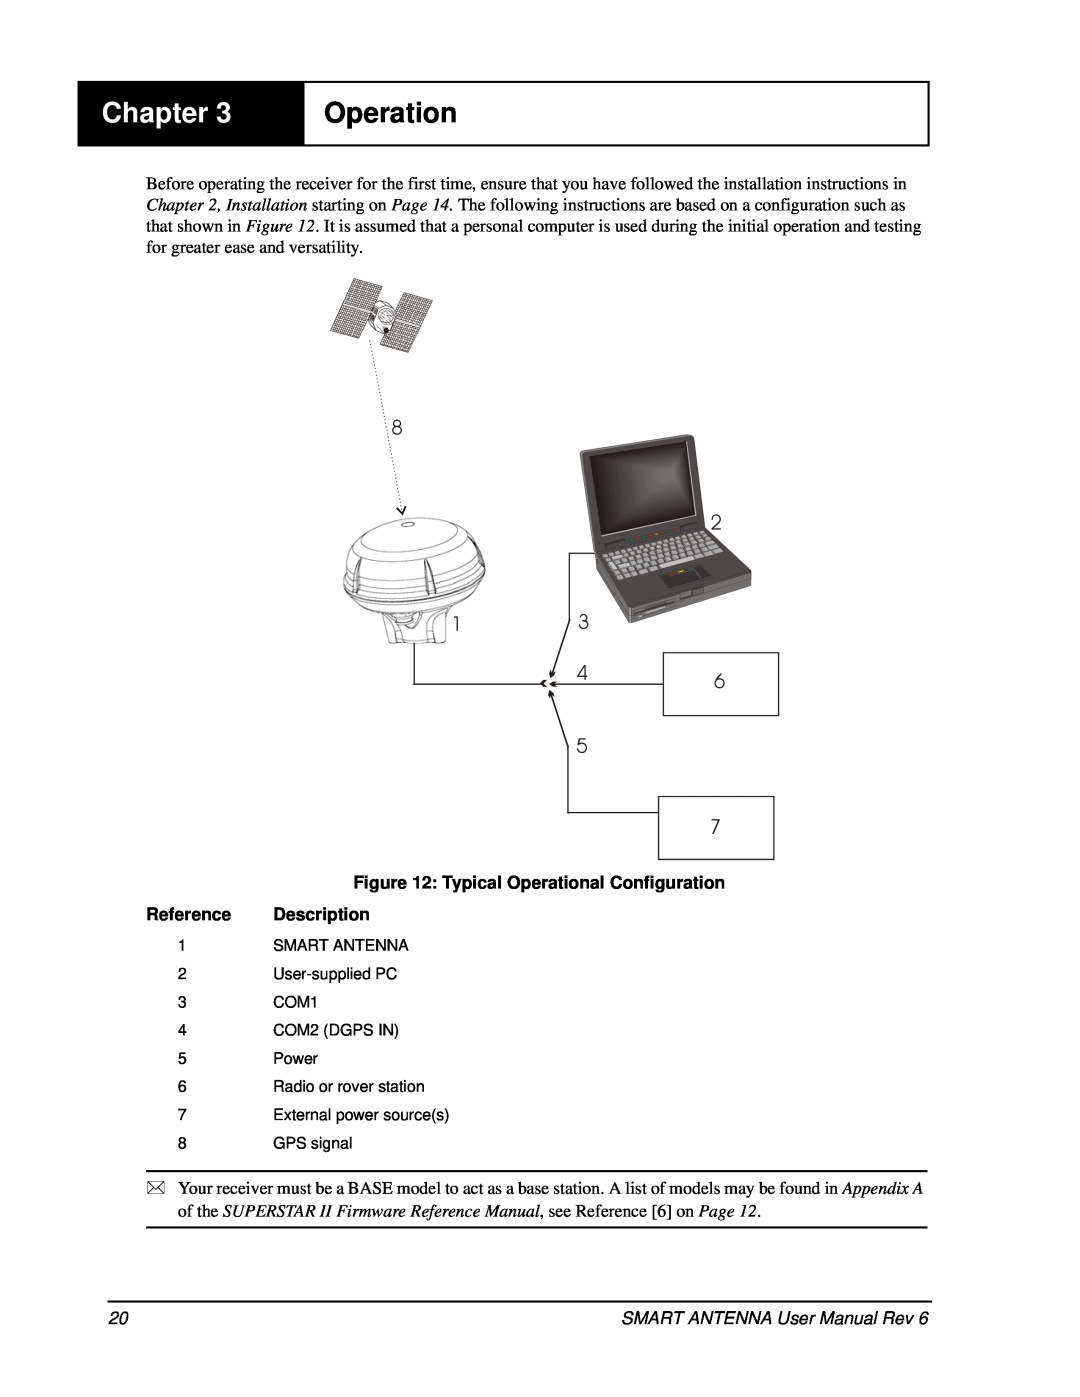 Novatel SMART ANTENNA user manual 8 2 1 46 5, Chapter, Typical Operational Configuration, Reference Description 